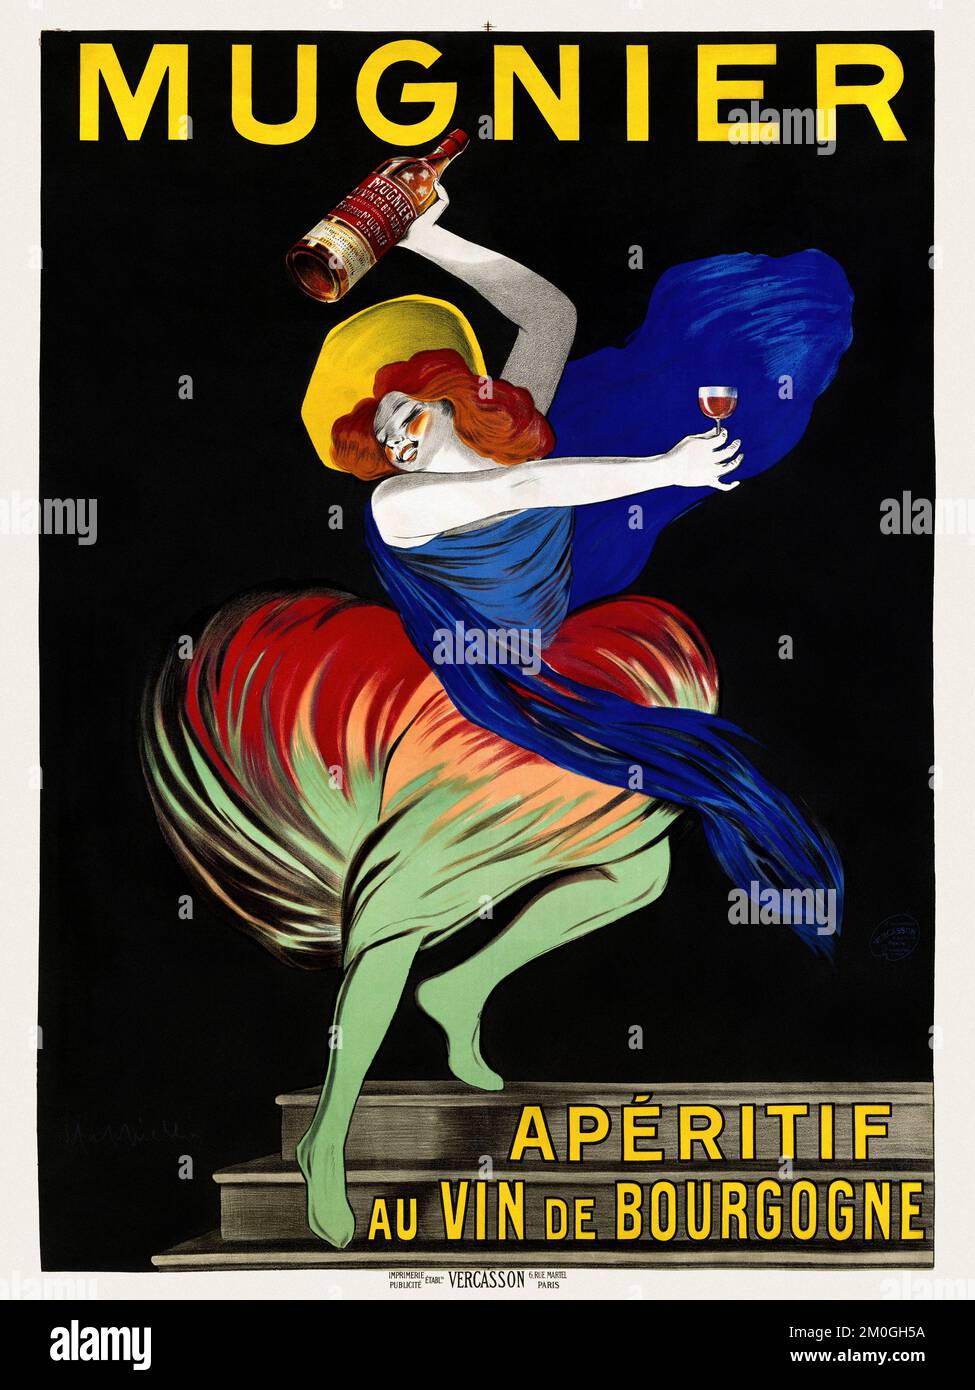 Original Vintage French Bourin Quinquina Liquor Poster 1936 by Bellenger –  The Ross Art Group